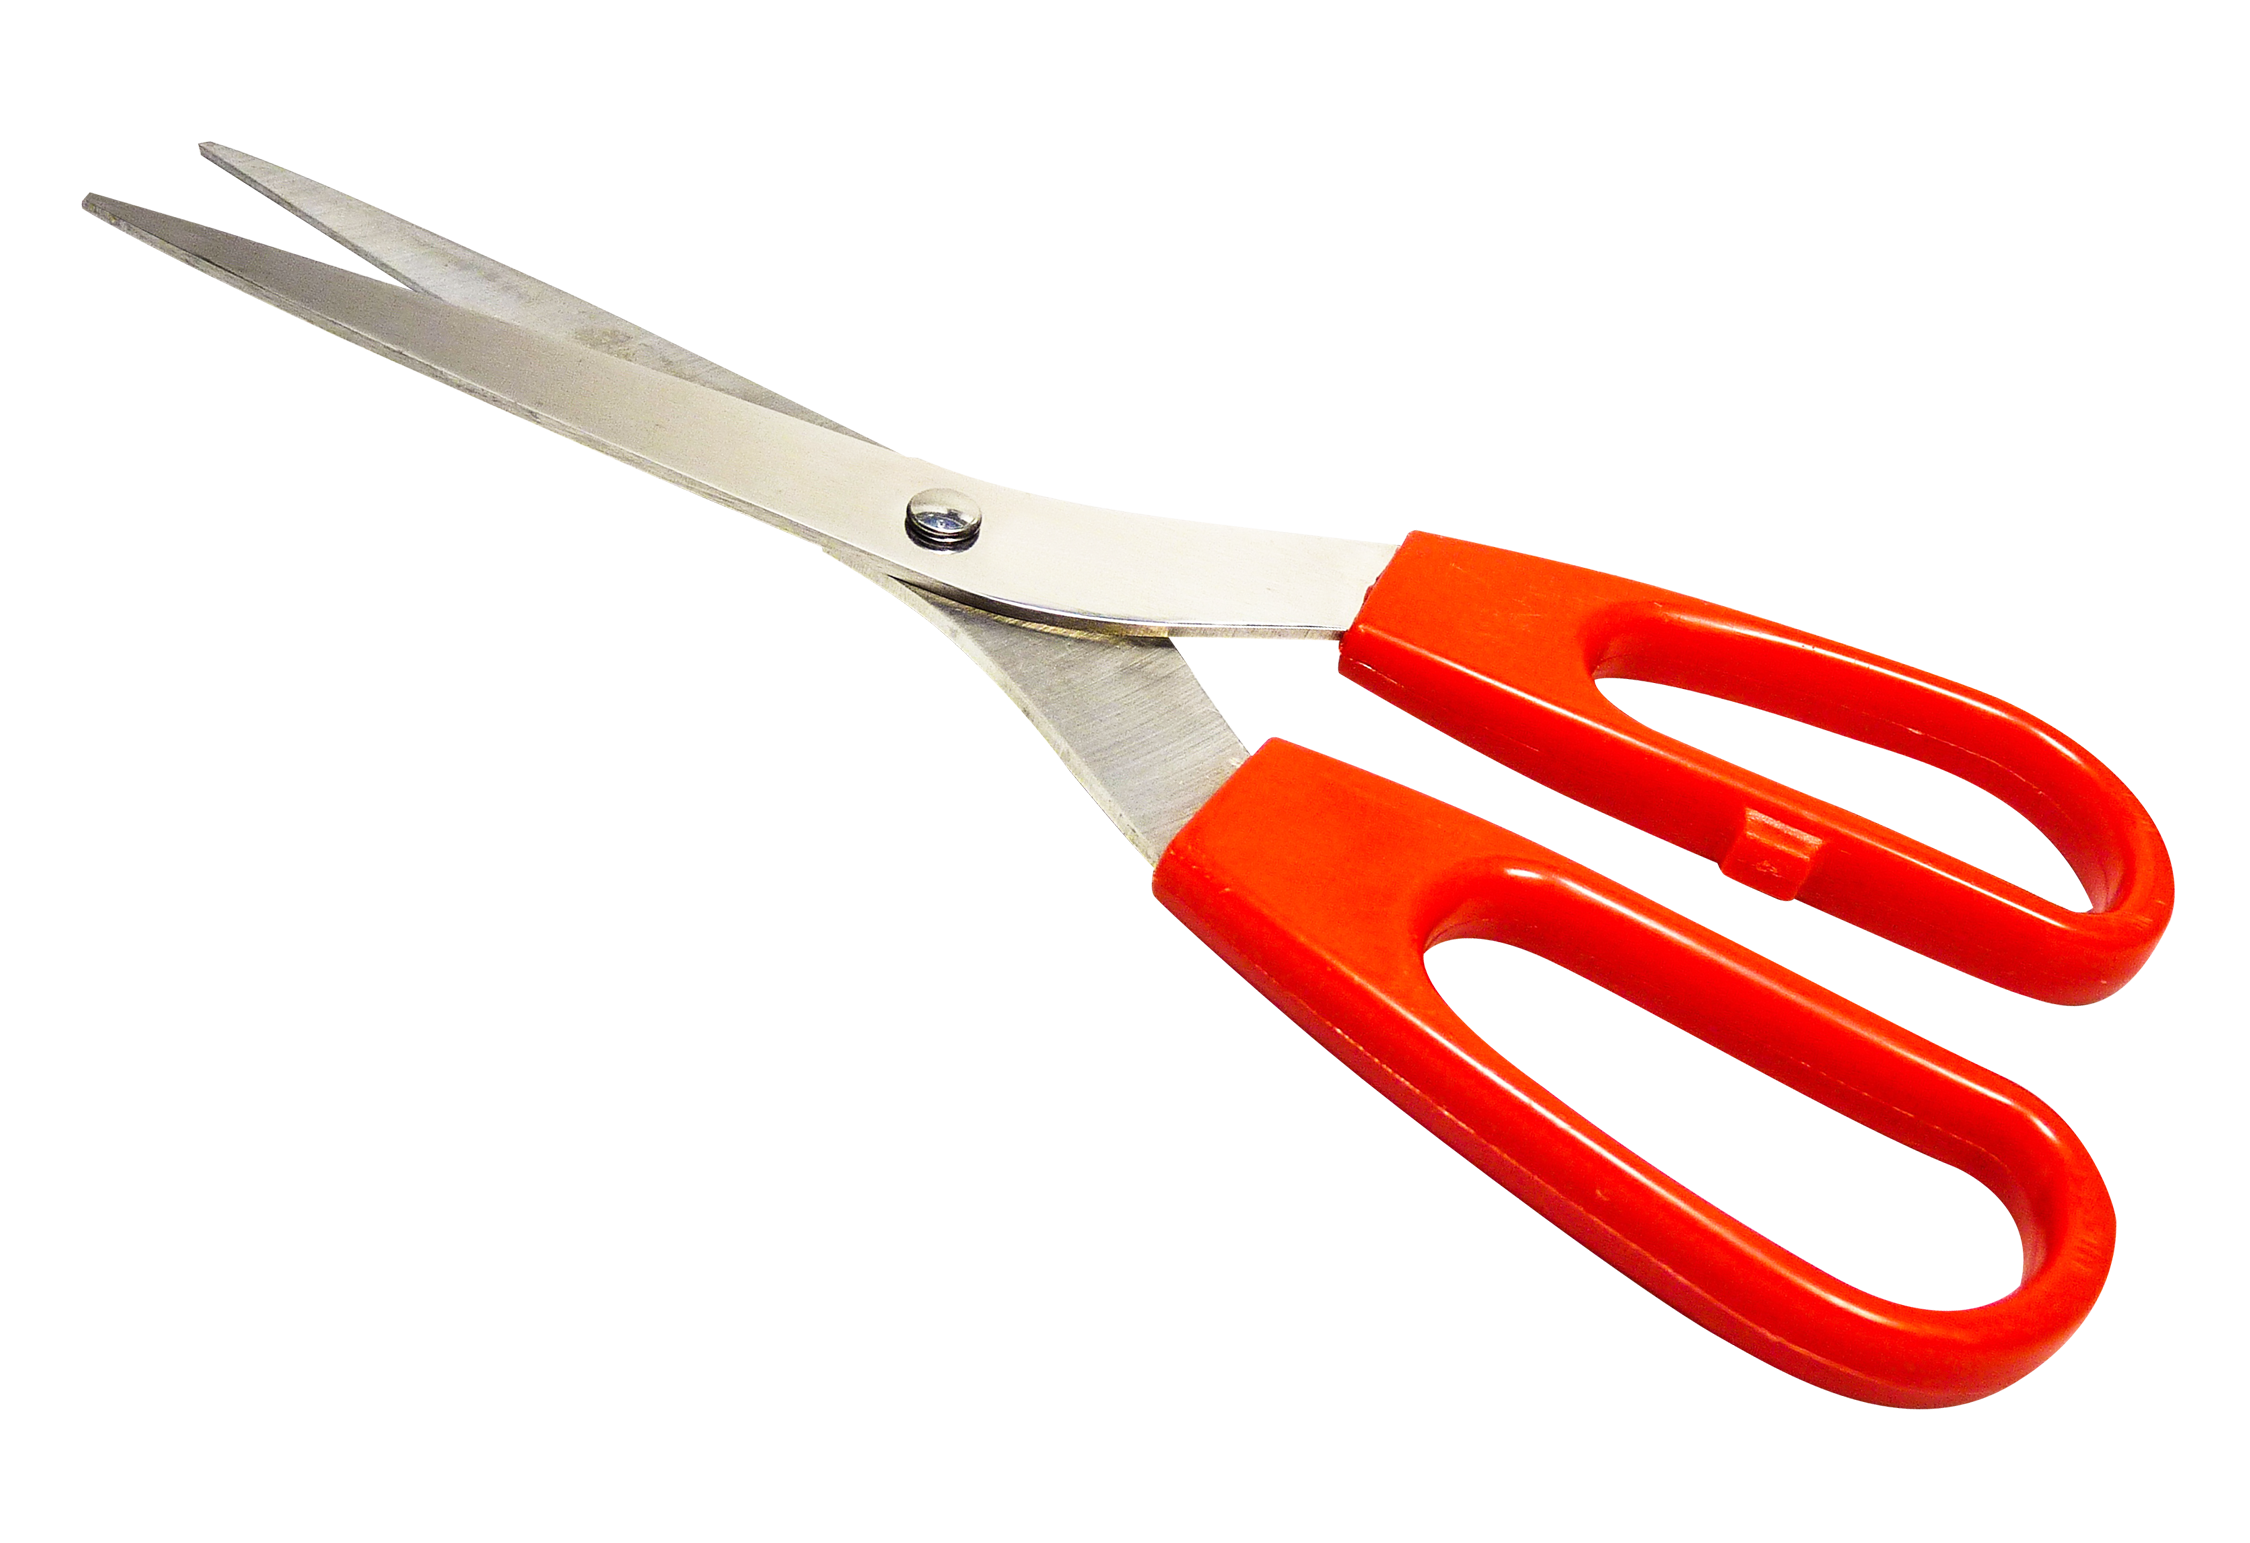 A Pair Of Scissors With Red Handles